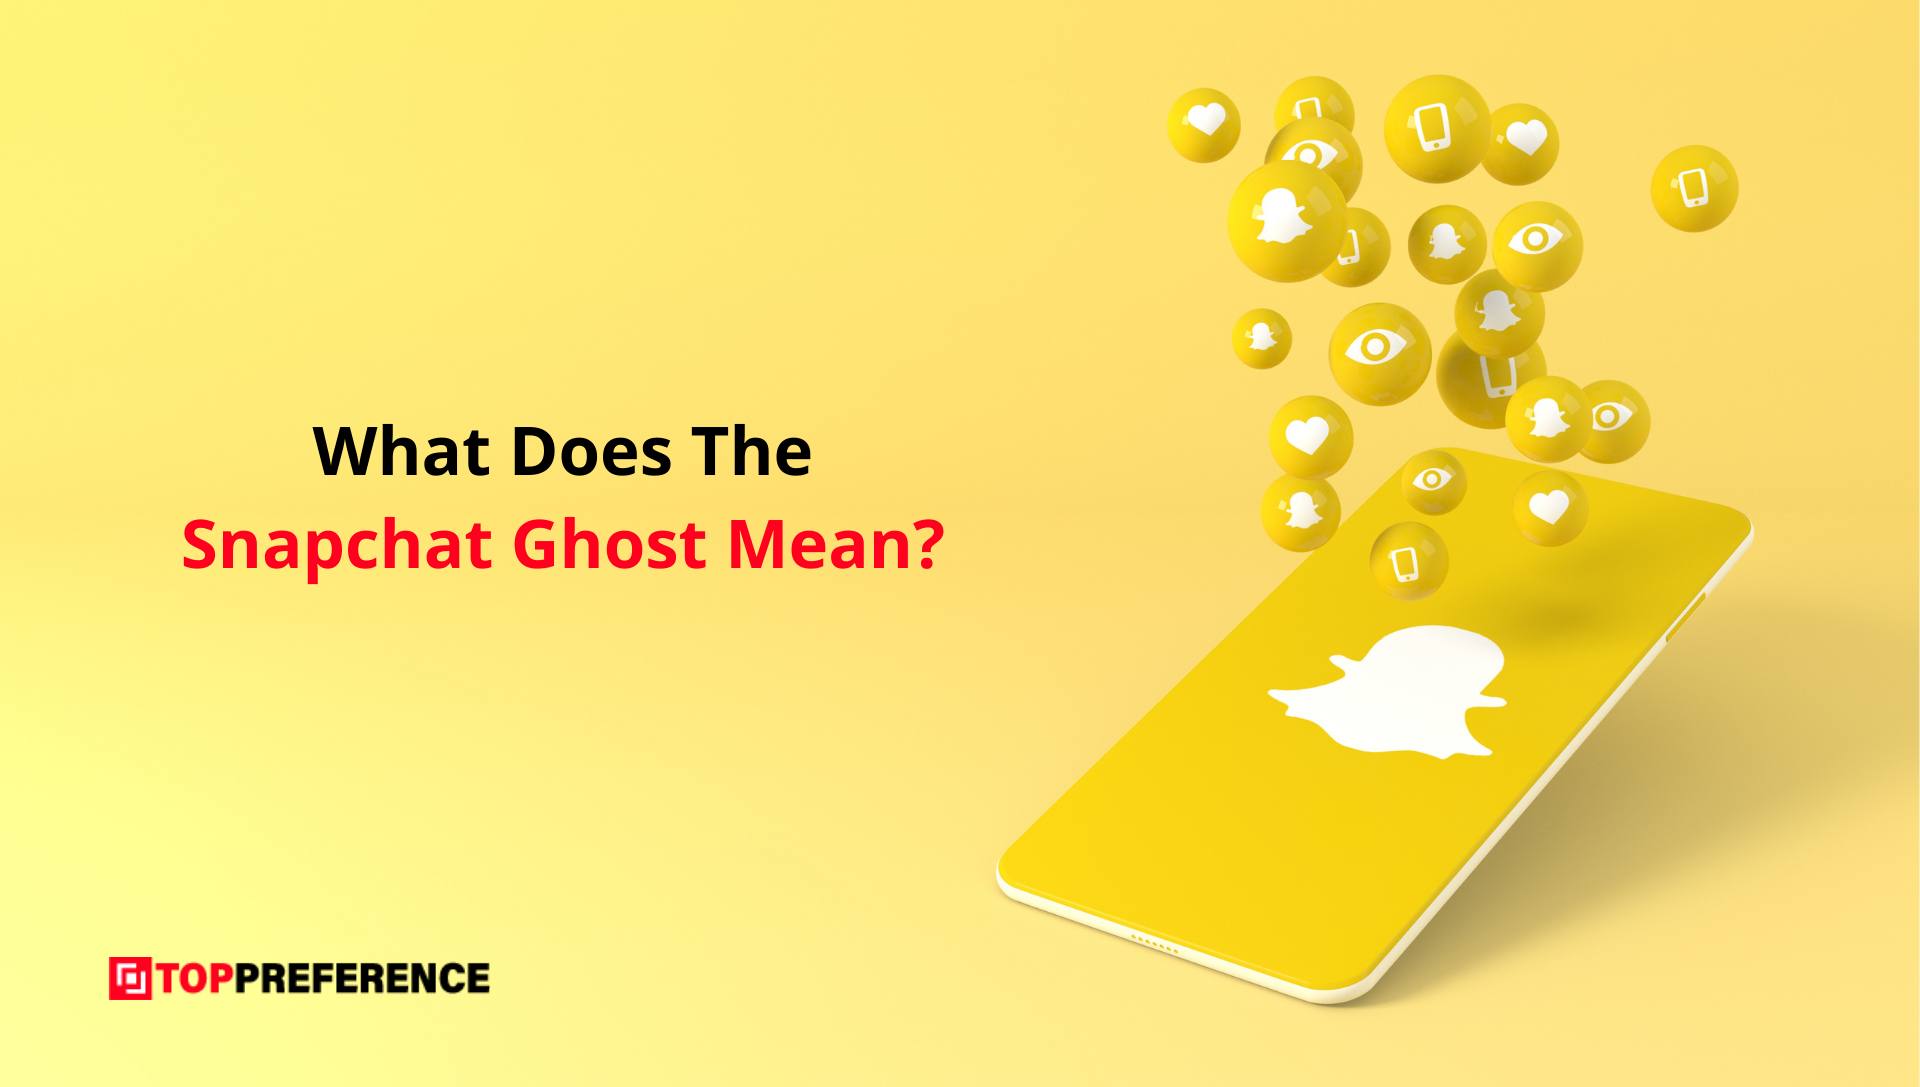 What Does The Snapchat Ghost Mean?